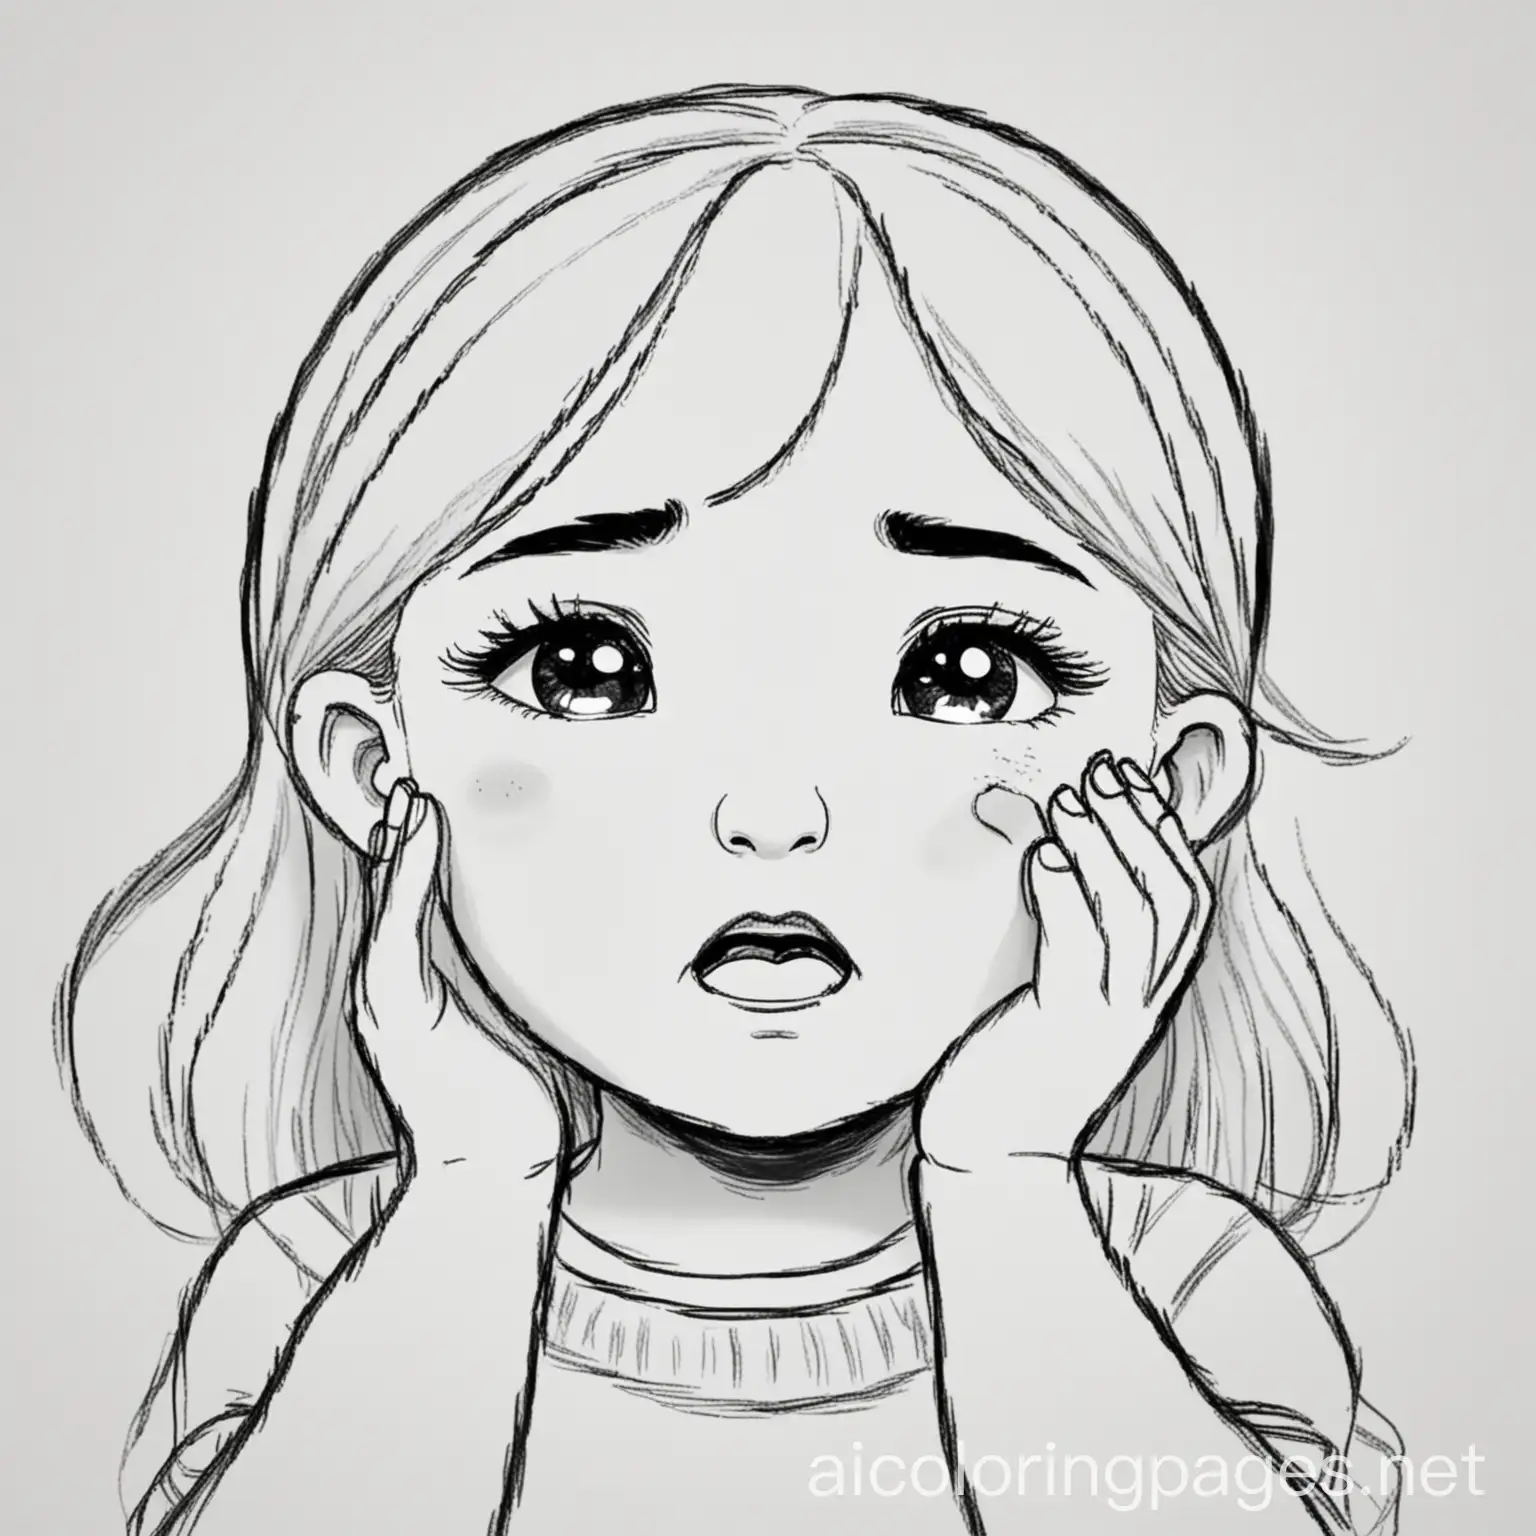 Little-Girl-Crying-Coloring-Page-Simple-Line-Art-on-White-Background